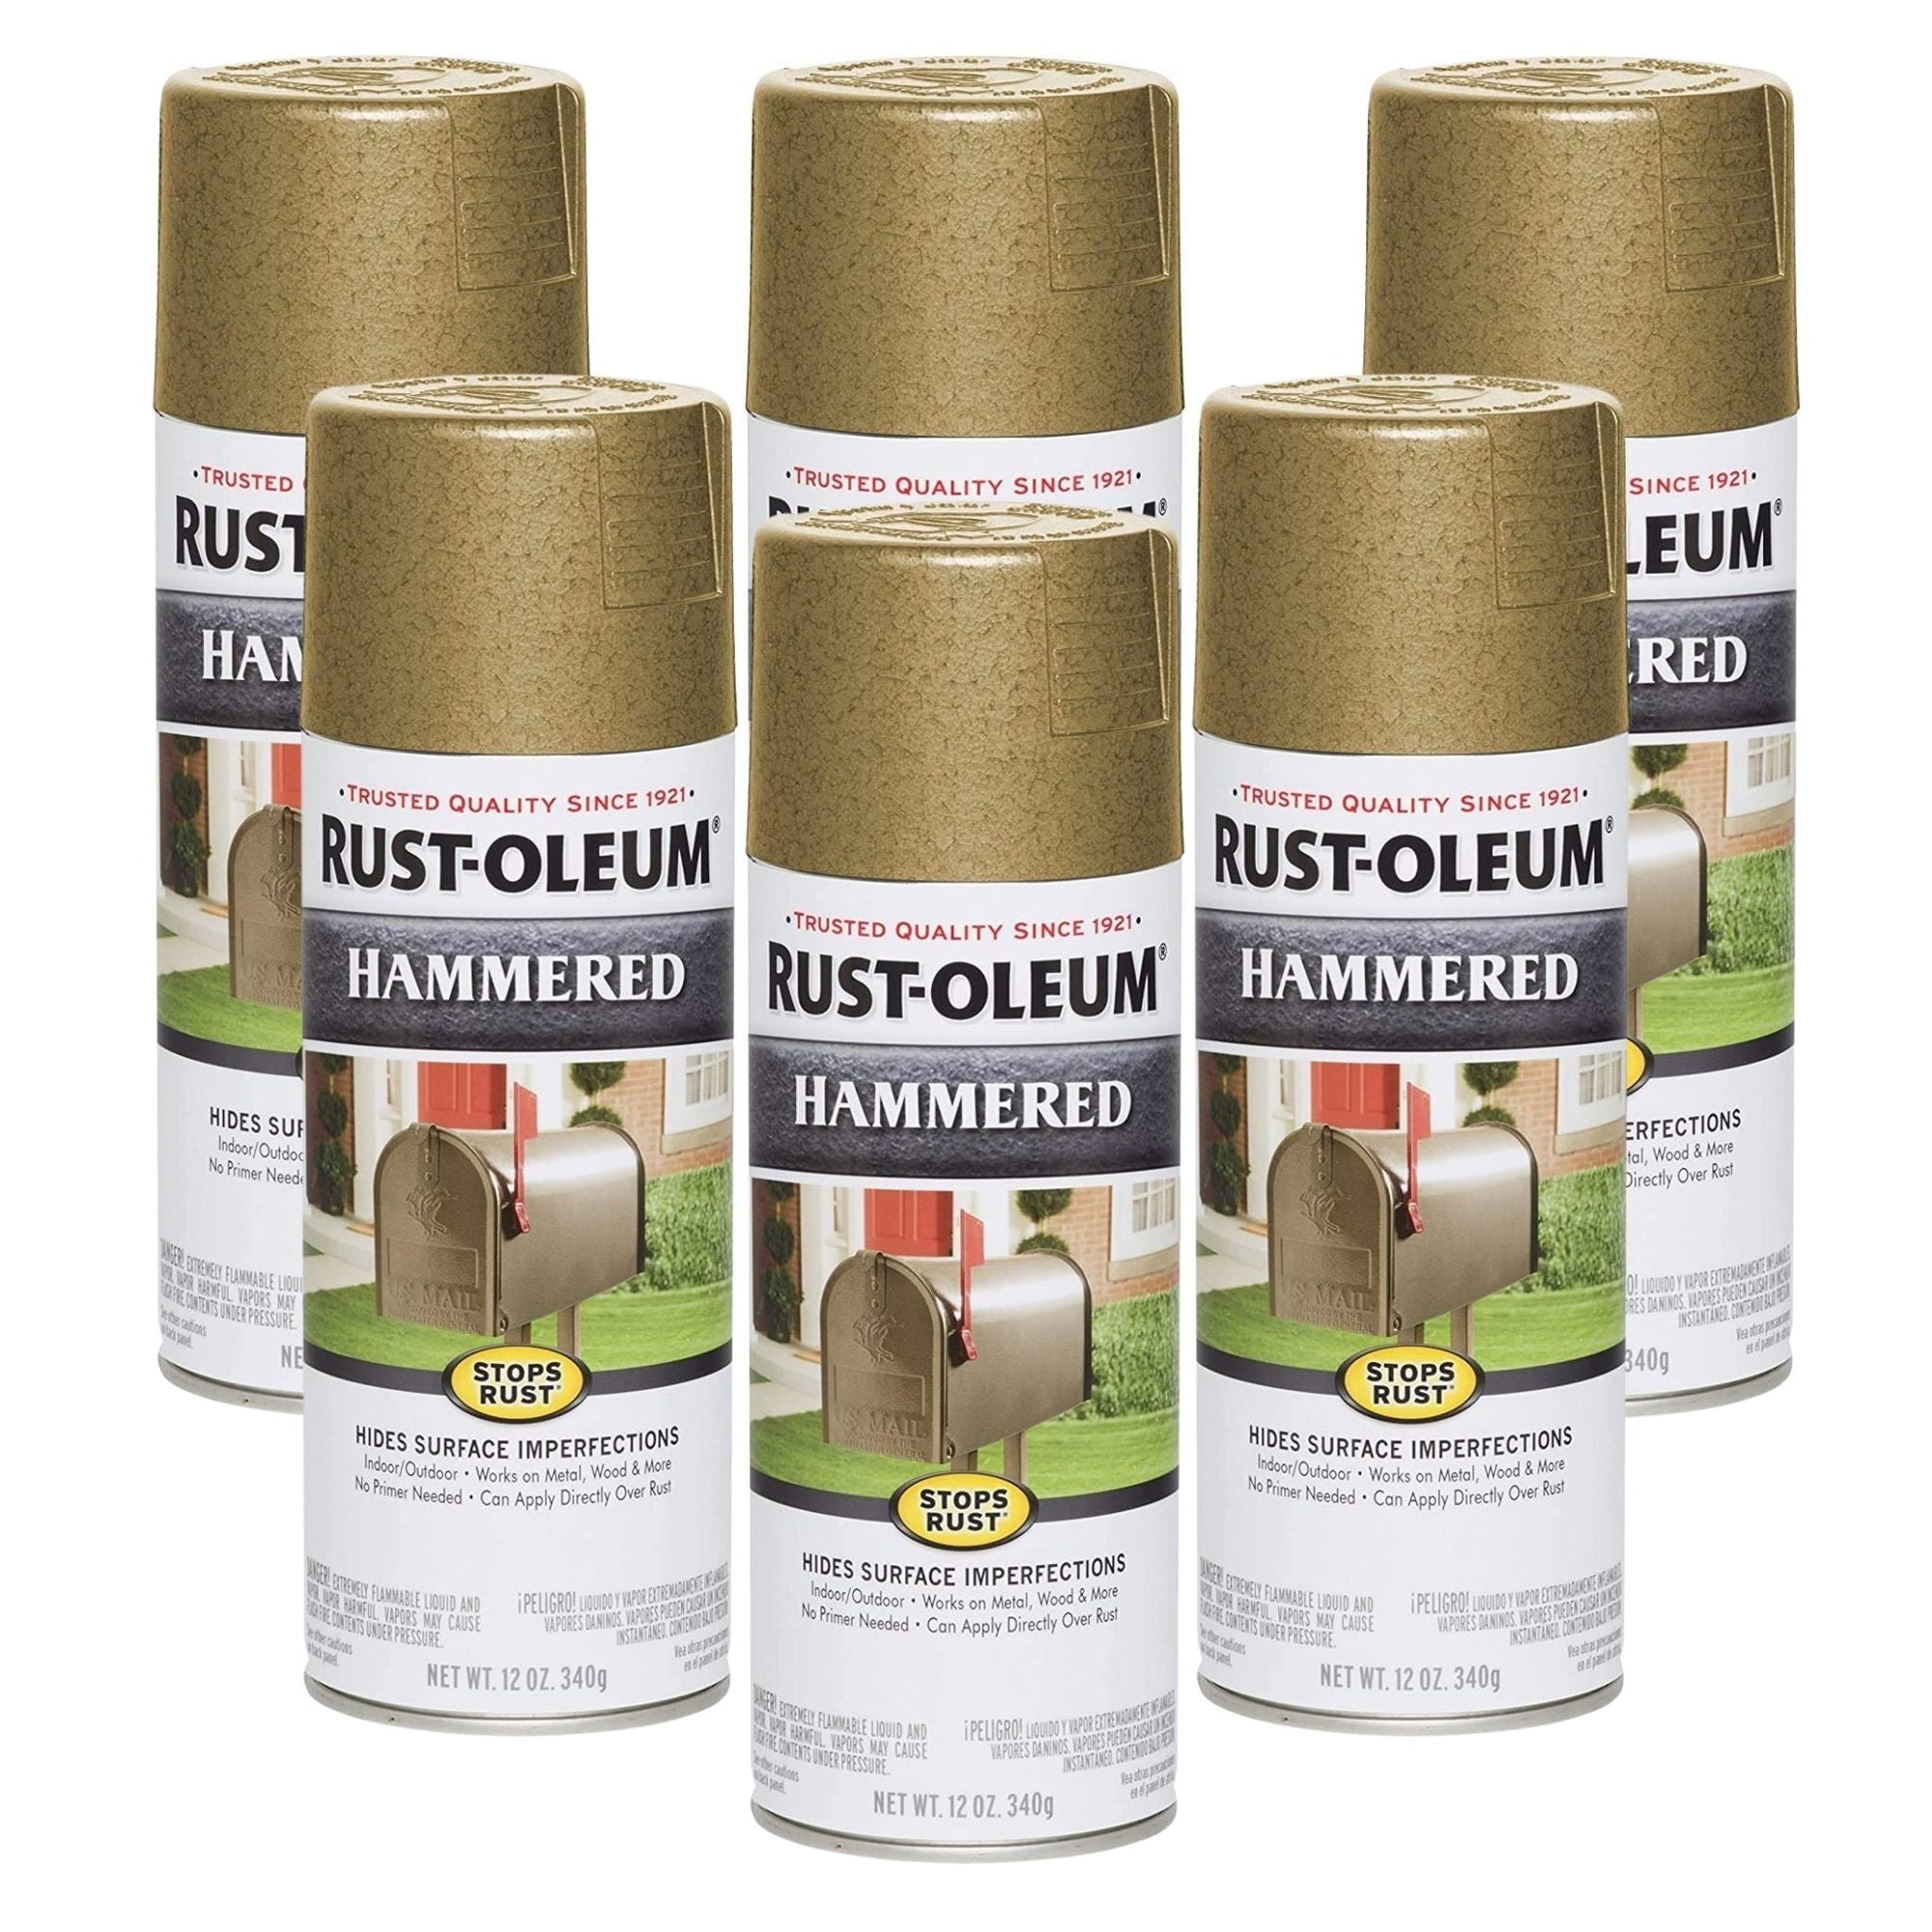 Rustoleum STOPS RUST SPRAY PAINT AND RUST PREVENTION - Hammered Gold (6 Cans) - South East Clearance Centre